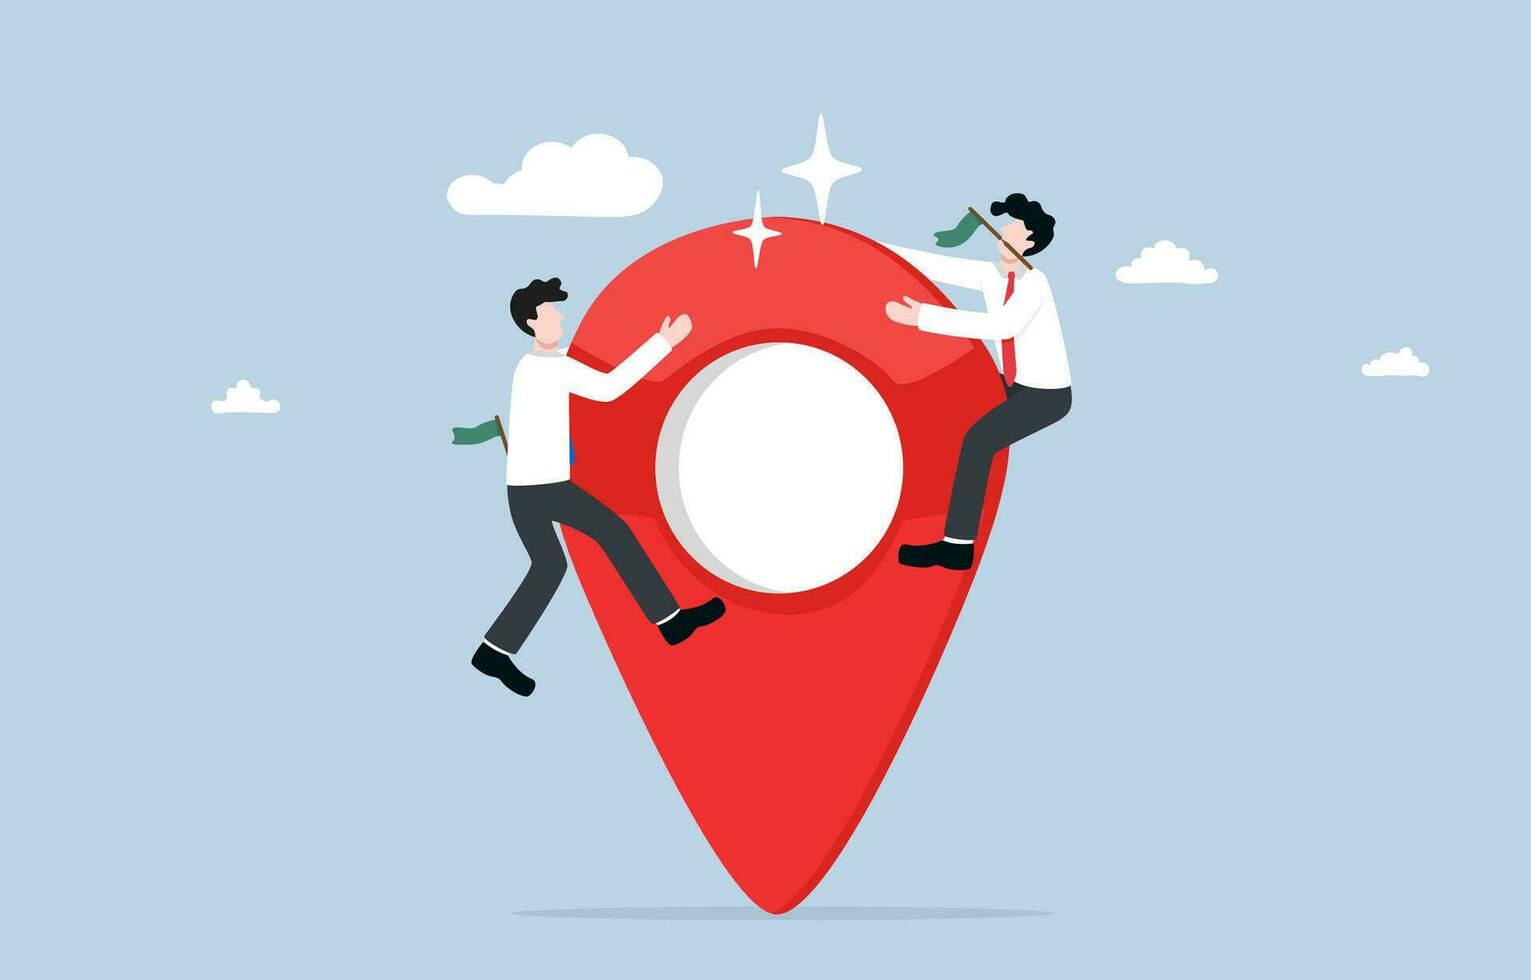 Competing to occupy business space, effort to gain maximum market share in specific area, ambition and leadership concept, Businessmen competing to stand on top of map pin icon. vector